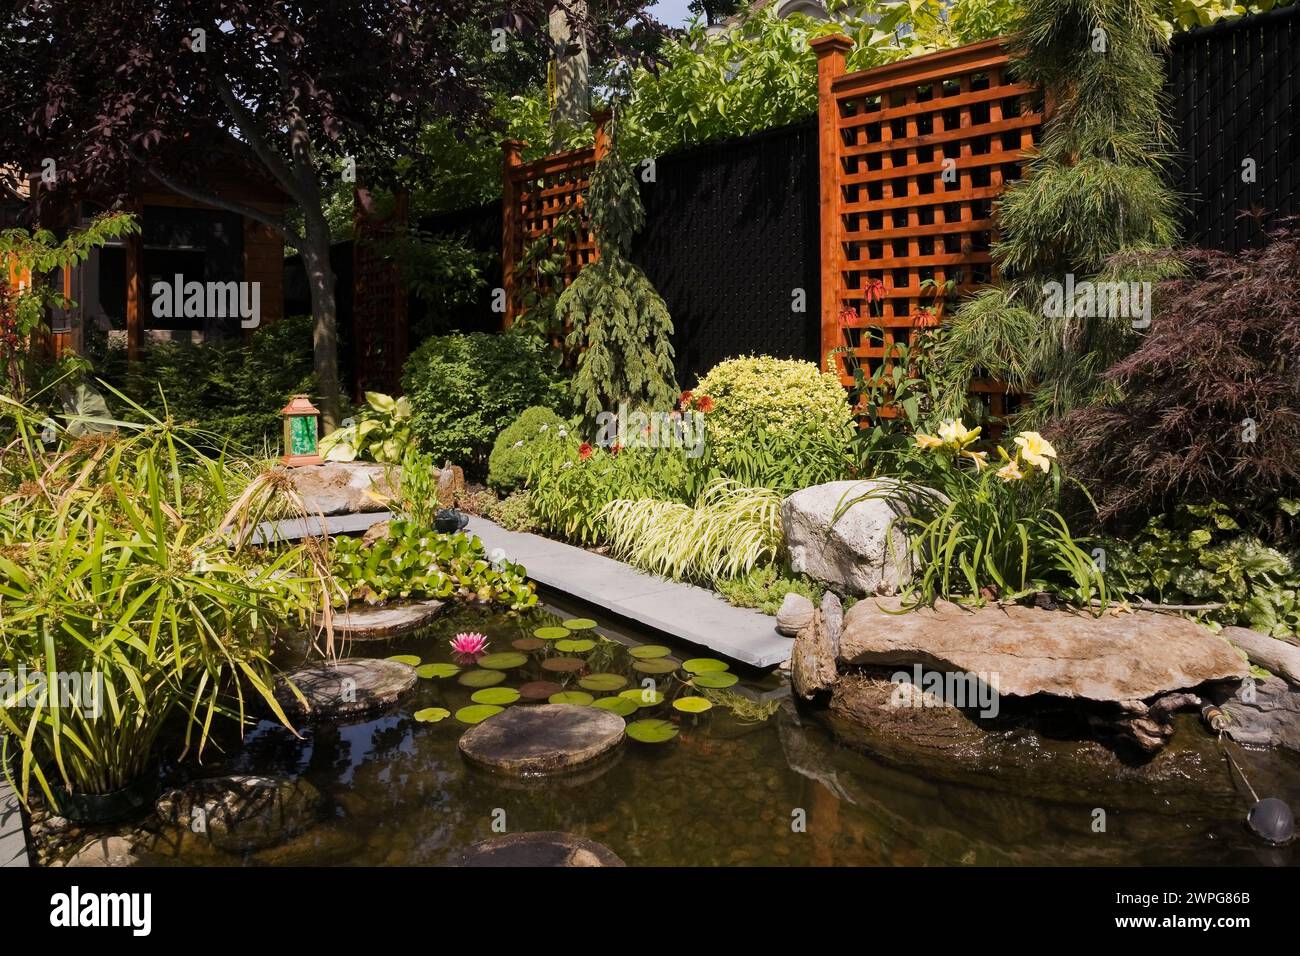 Pond with stepping stones, pink Nymphaea - Water Lily, Cyperus papyrus, Eichornia crassipes - Water Hyacinth, yellow Hemerocallis - Daylilies, Acer. Stock Photo